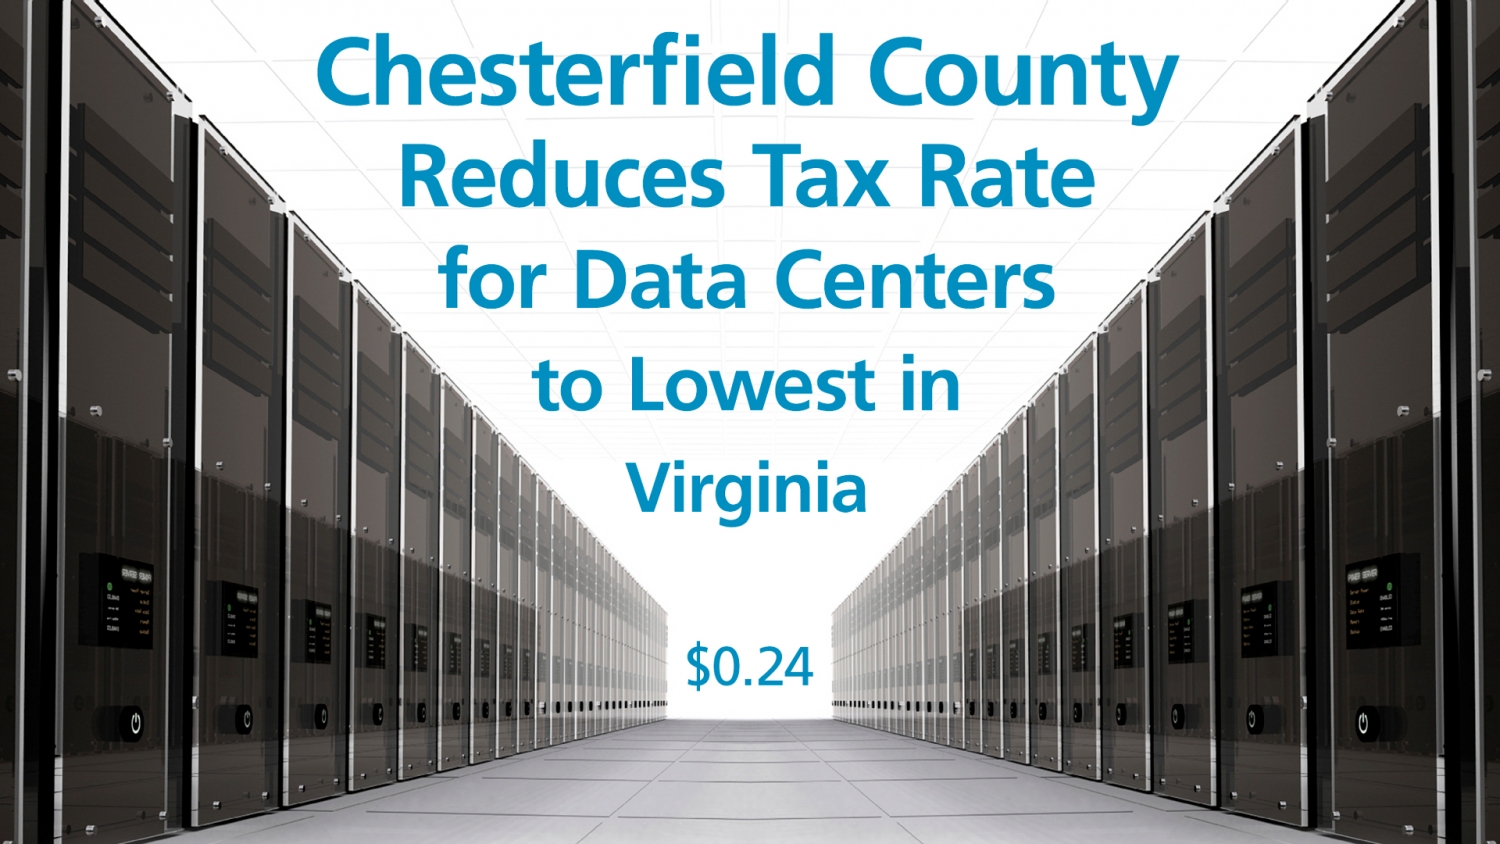 Chesterfield County Cuts Data Center Tax Rate to Lowest In Virginia